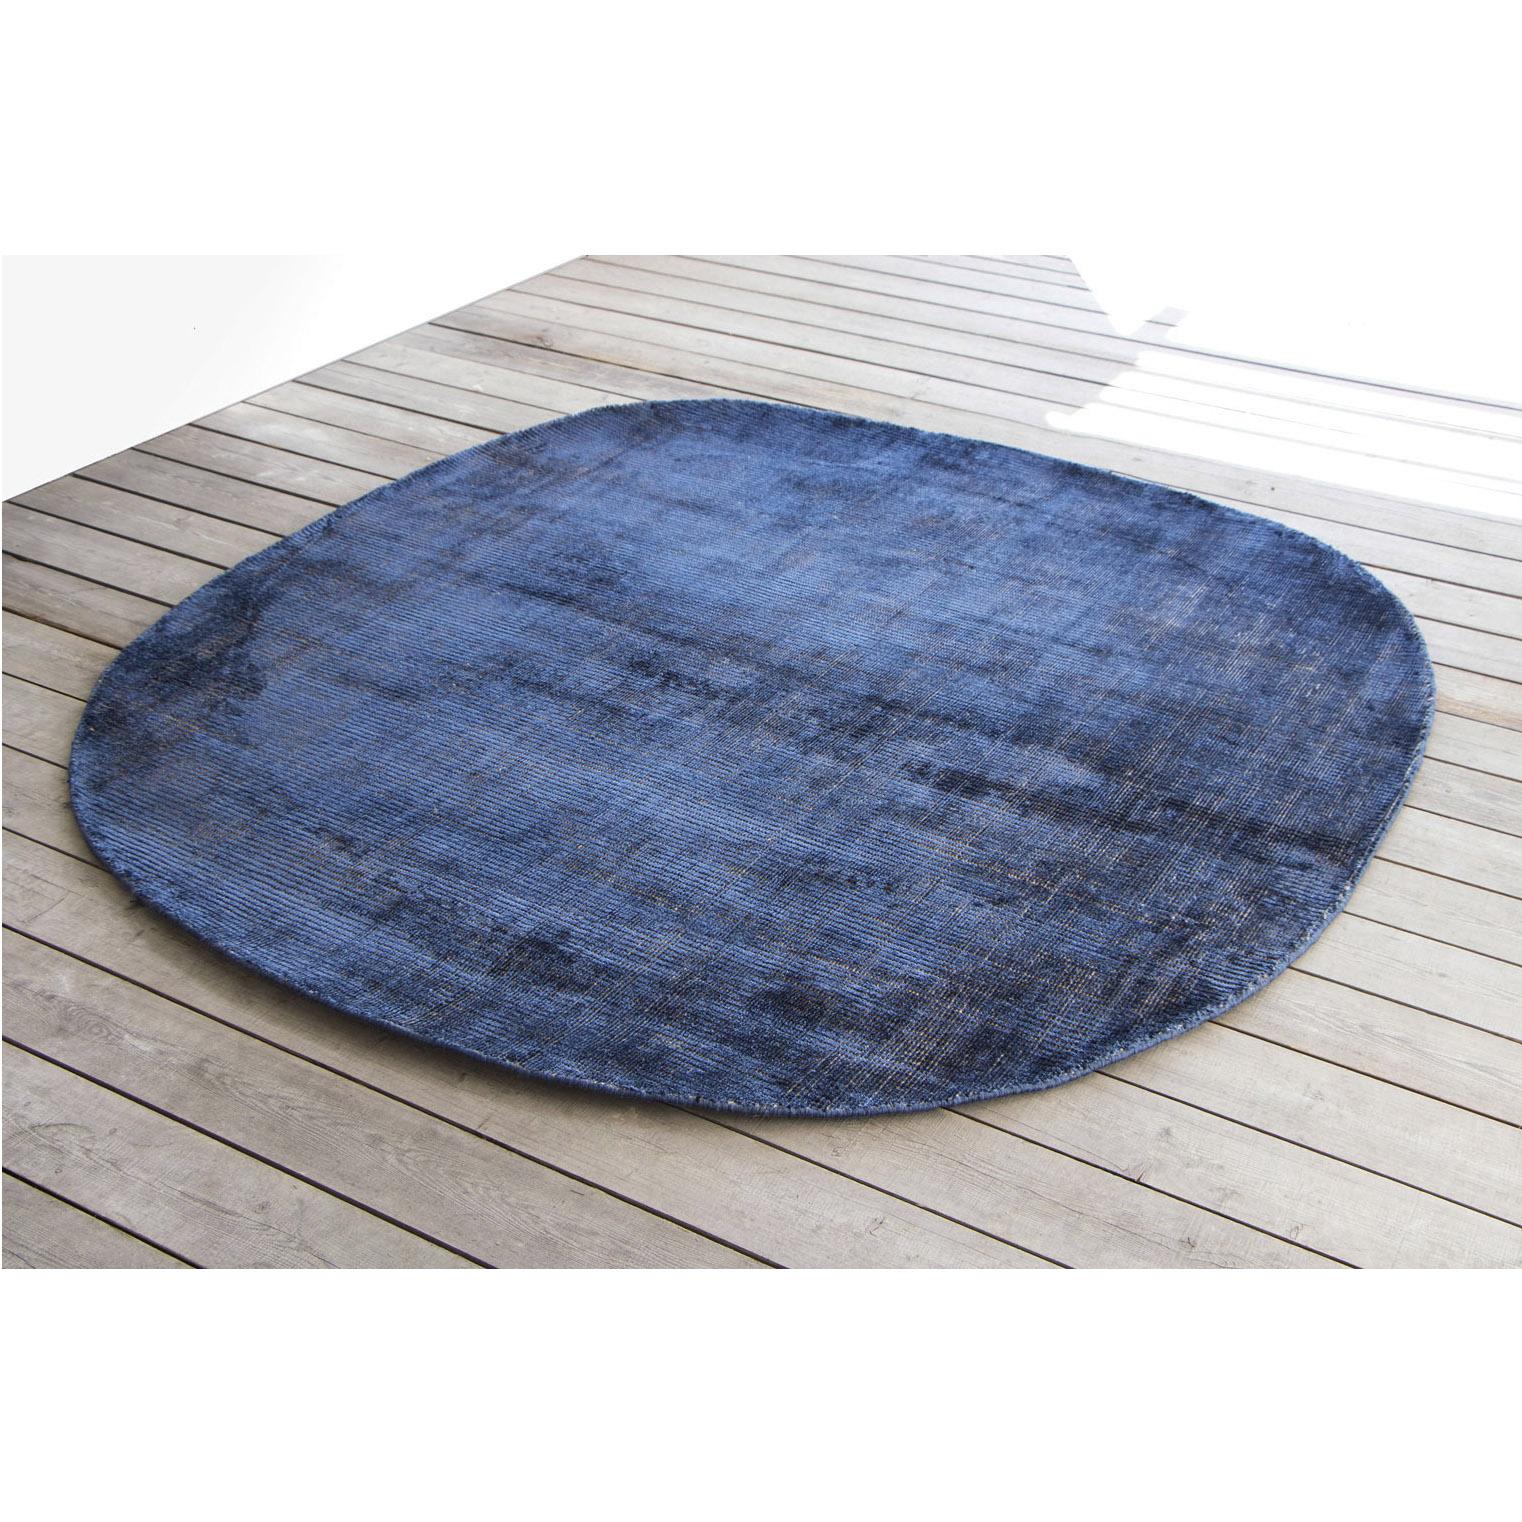 Modern Contemporary Natural Shiny Blue Pure Silk Rug by Deanna Comelllini 180x190 cm For Sale